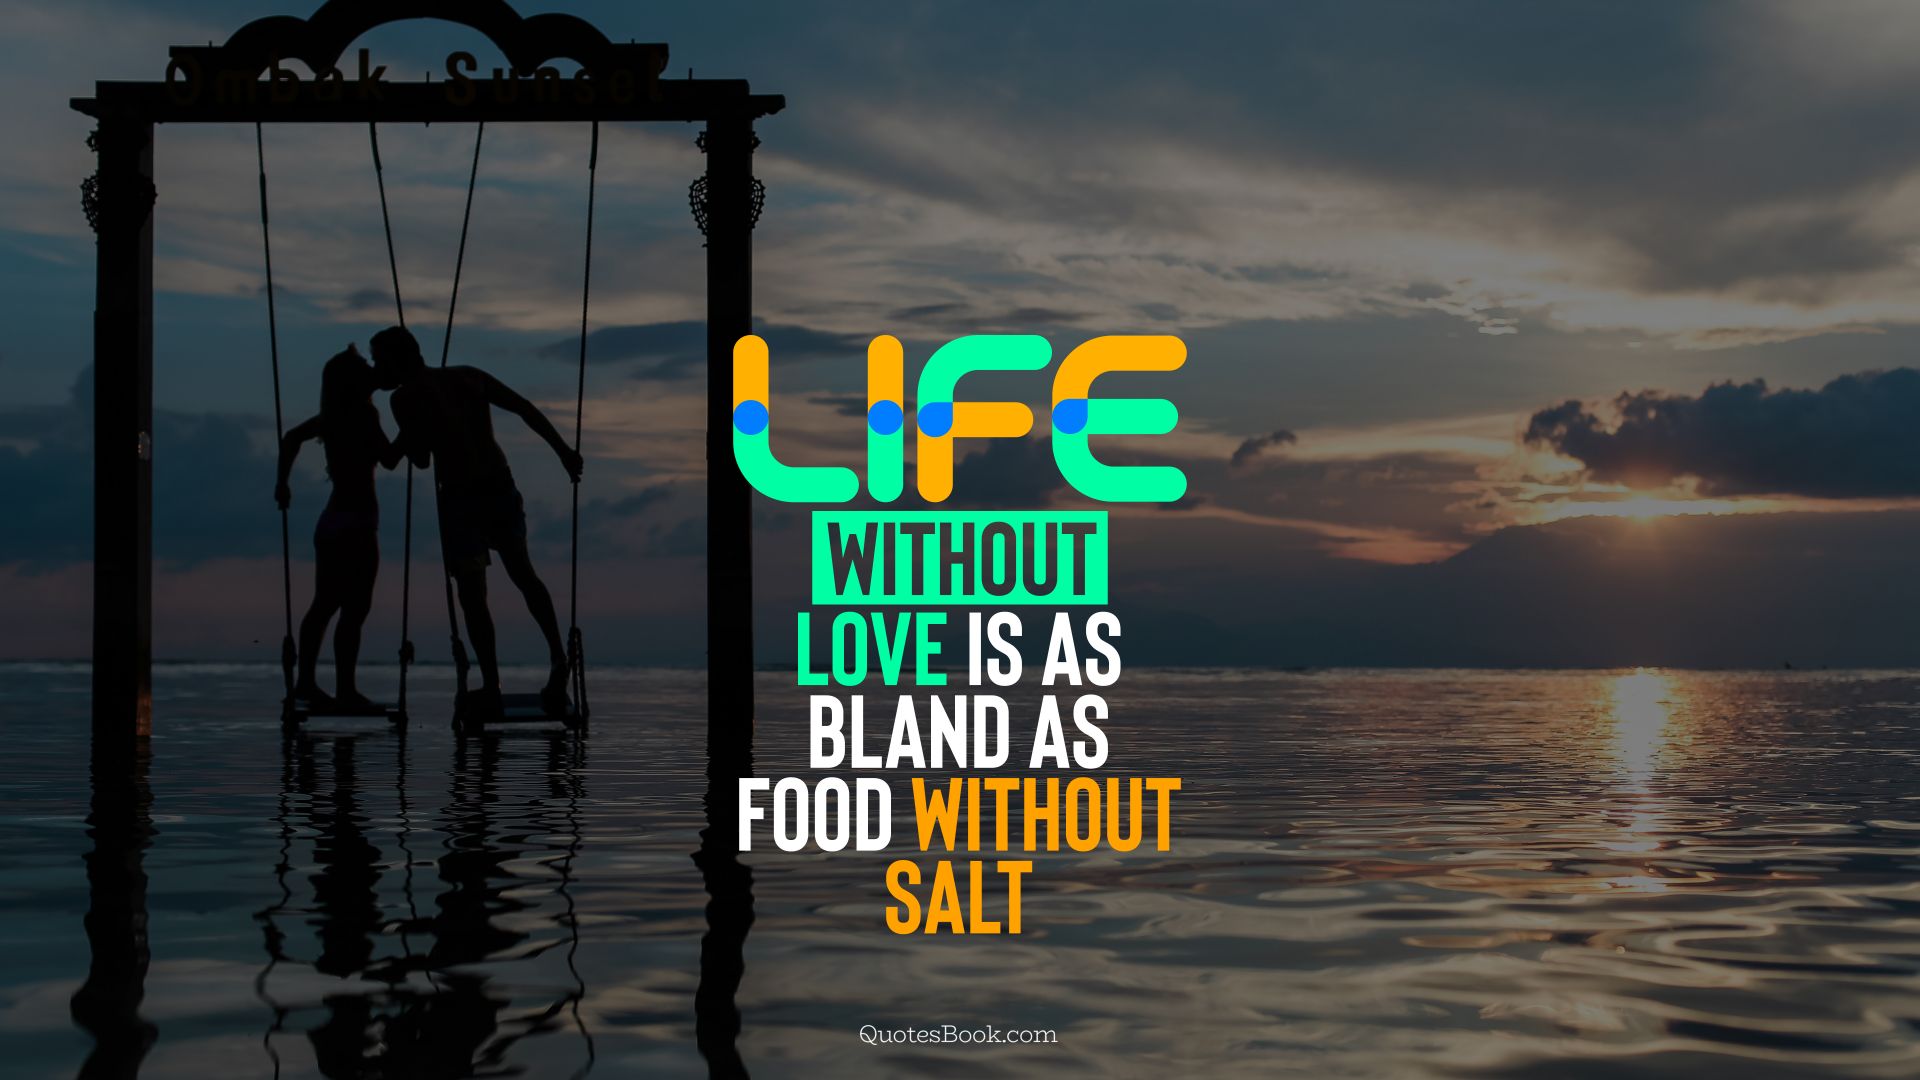 Life without love is as bland as food without salt. - Quote by QuotesBook